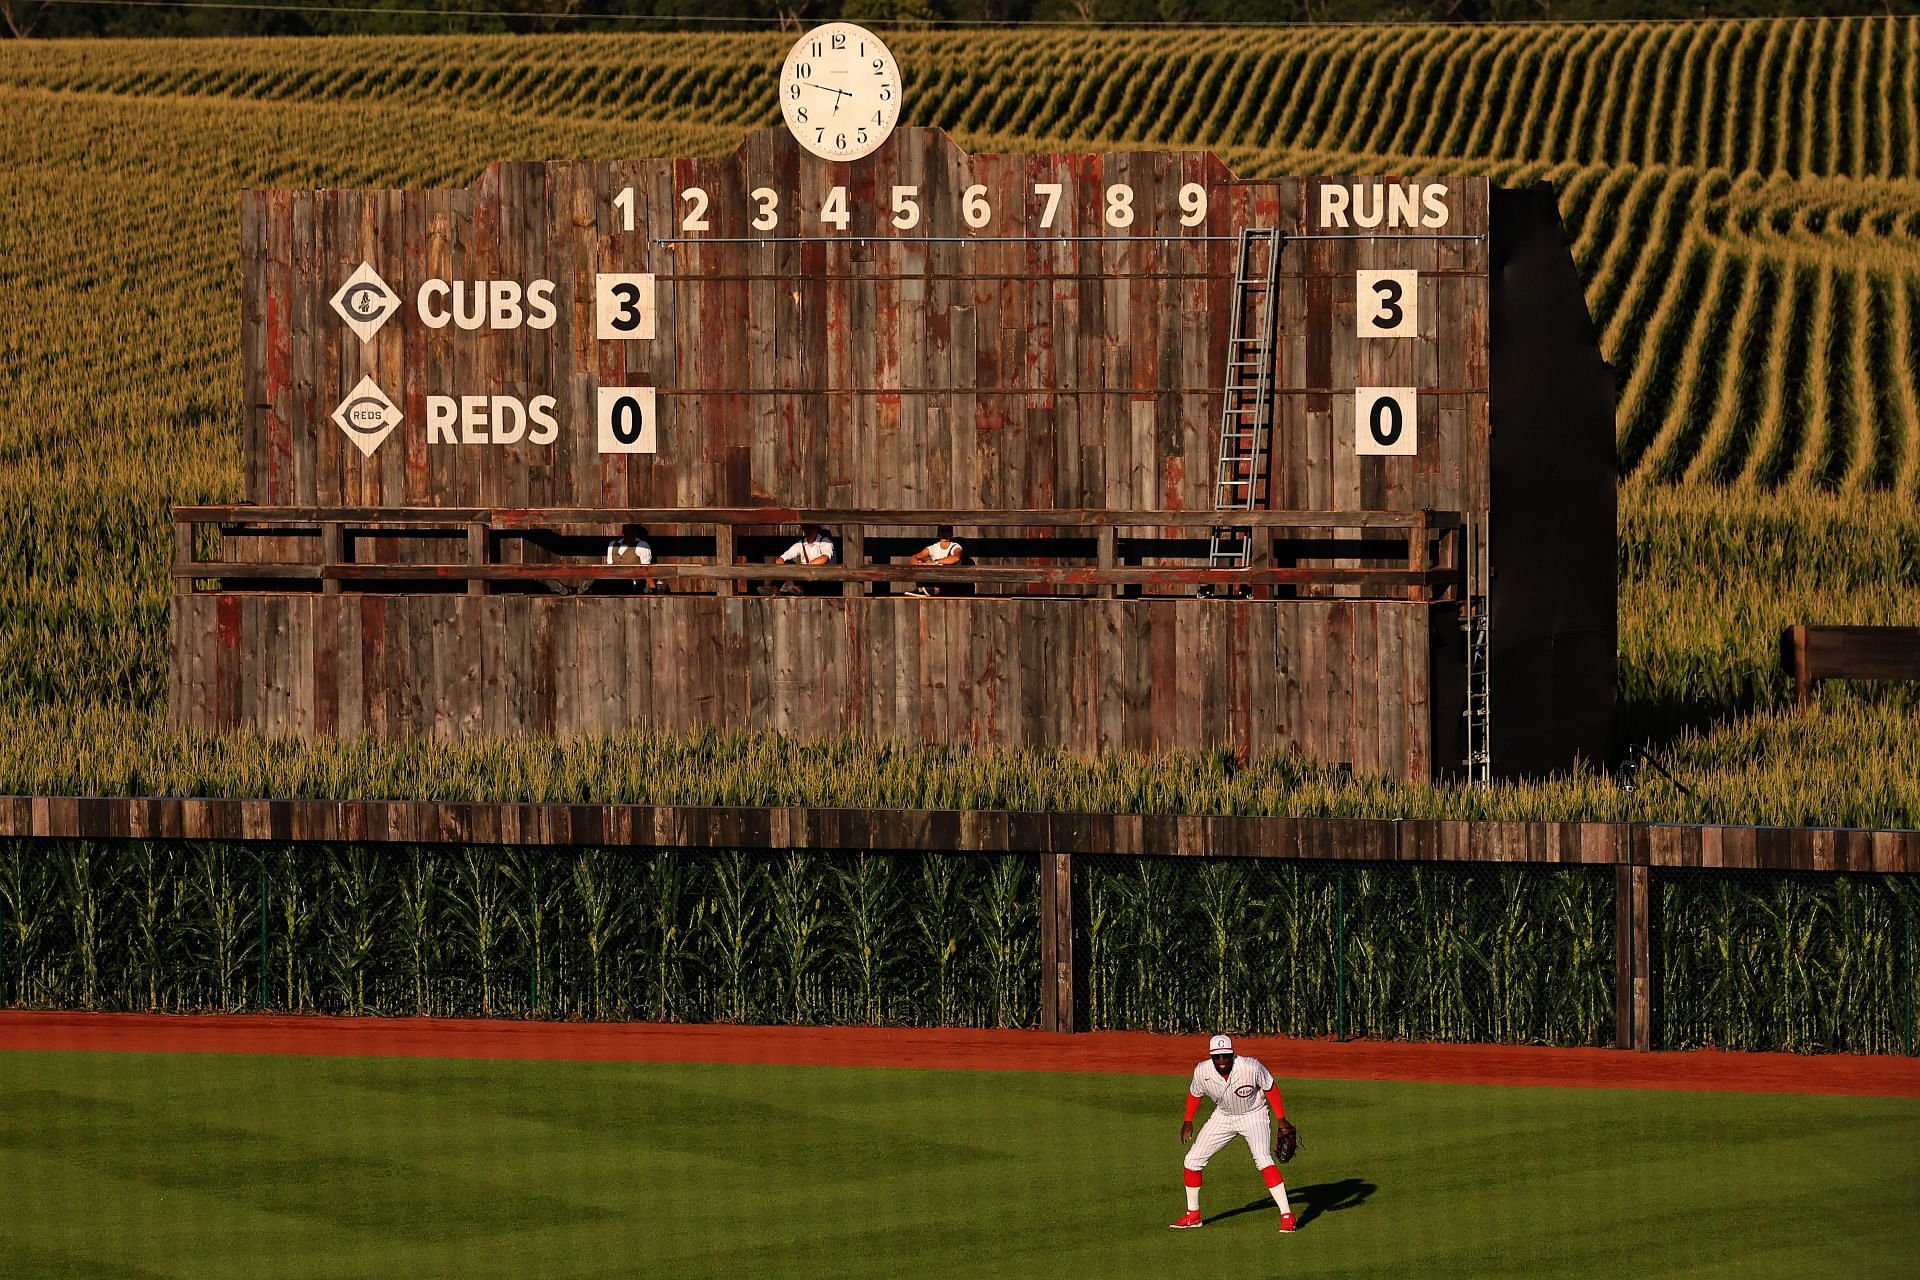 Where will the Giants-Cardinals Field of Dreams game take place in